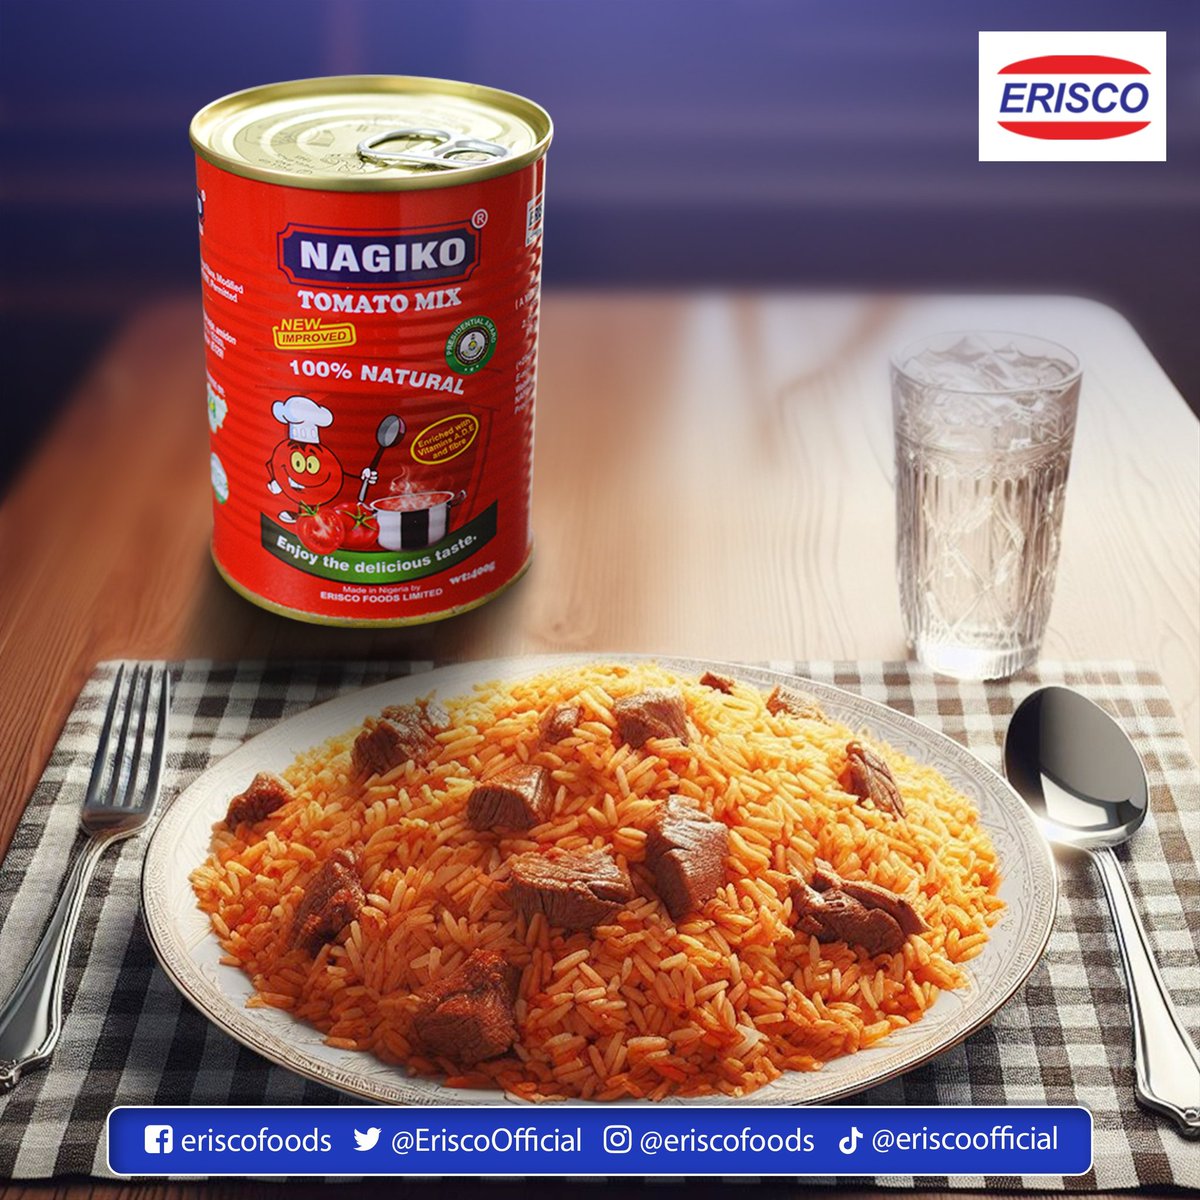 Nigerian families and chefs choose NAGIKO Tomato Mix for a party jollof with a delightful taste. NAGIKO is available in supermarkets nationwide.
#CulinaryDelight #eriscofood